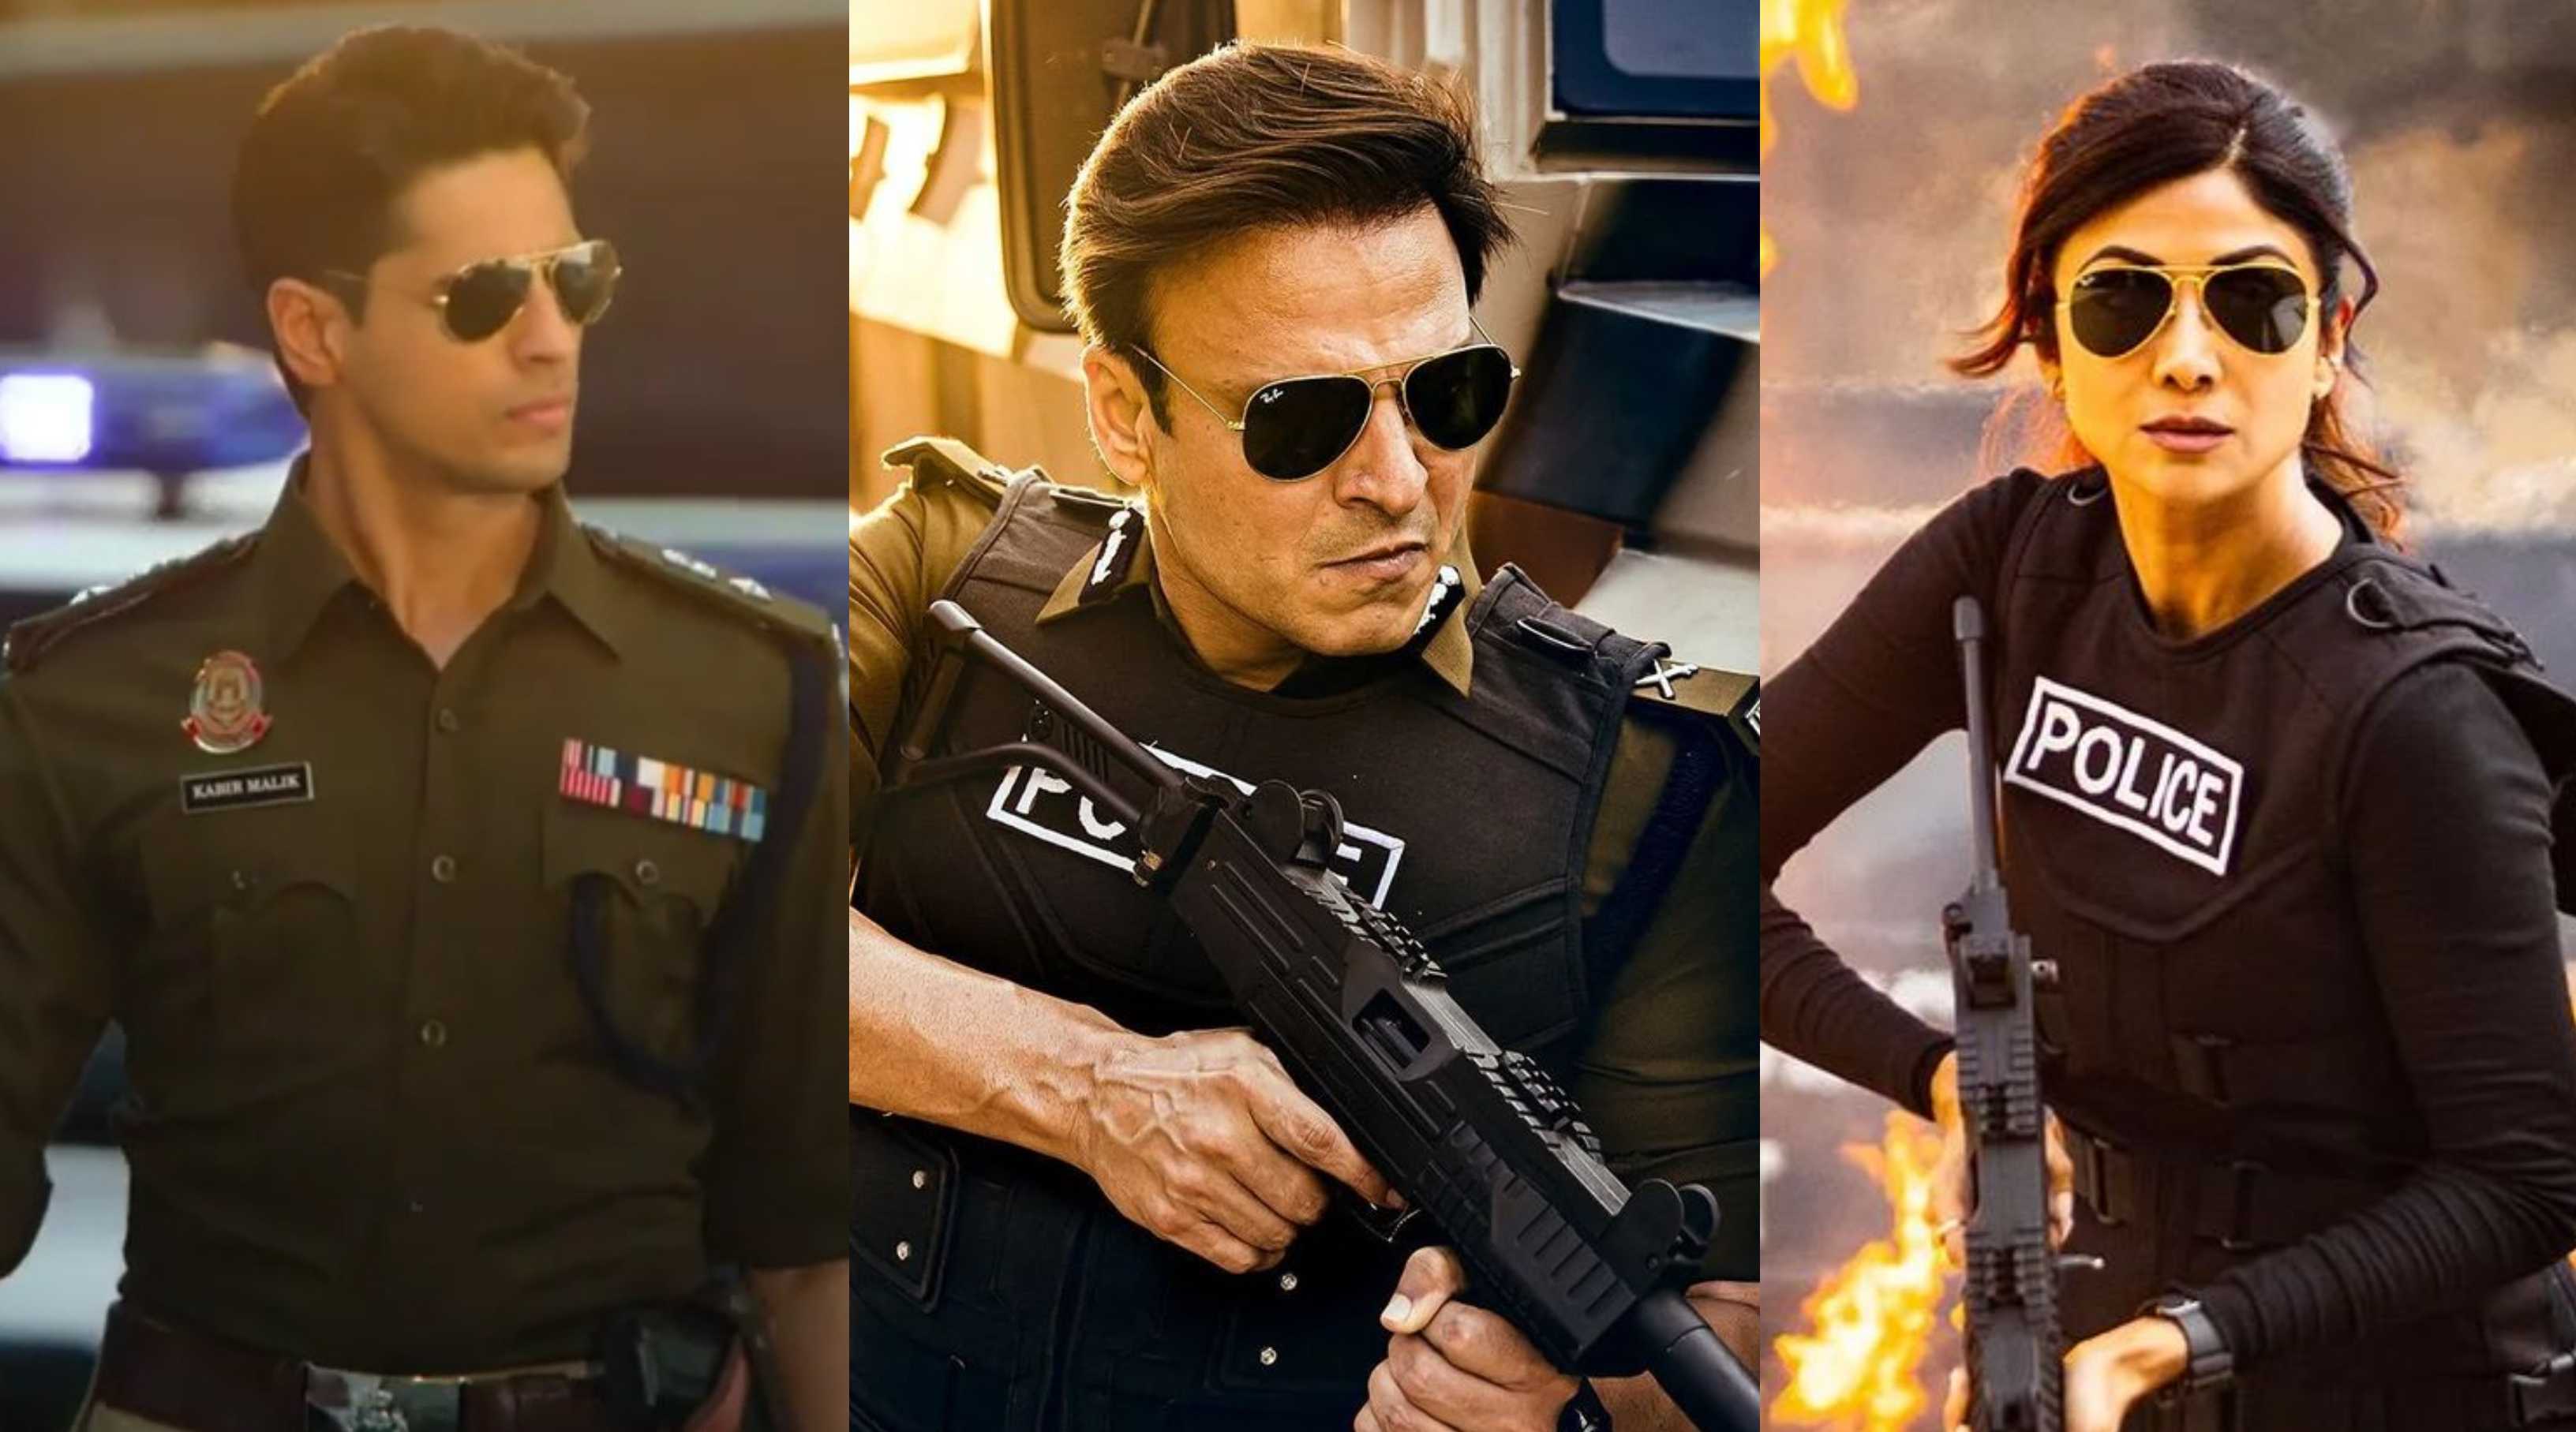 Indian Police Force: Vivek Oberoi joins Sidharth Malhotra and Shilpa Shetty as super cop in Rohit Shetty’s series